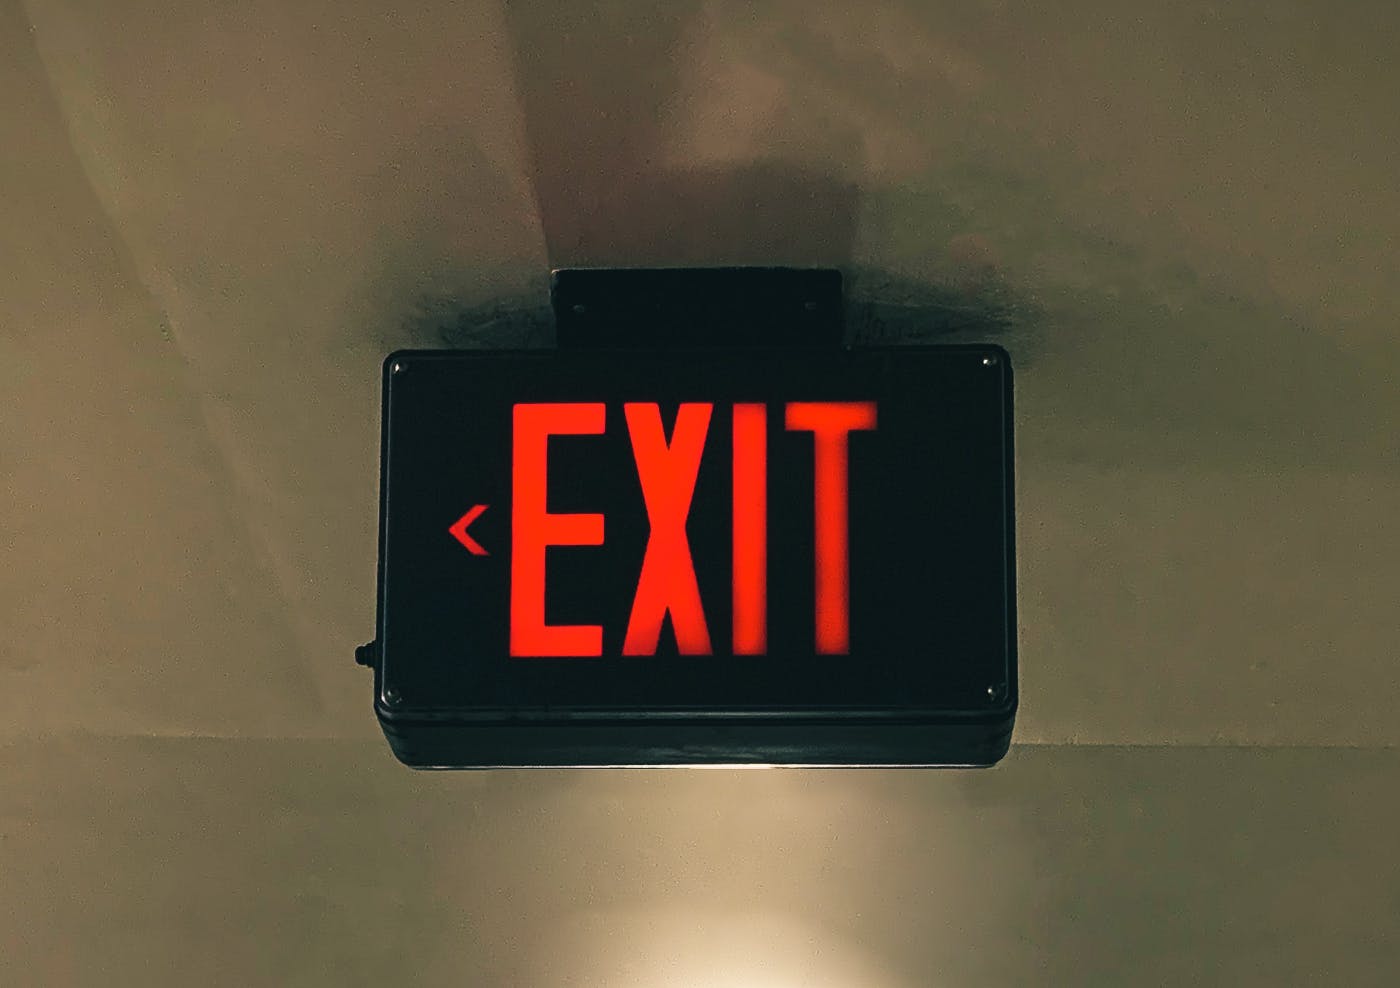 A red exit sign on the ceiling